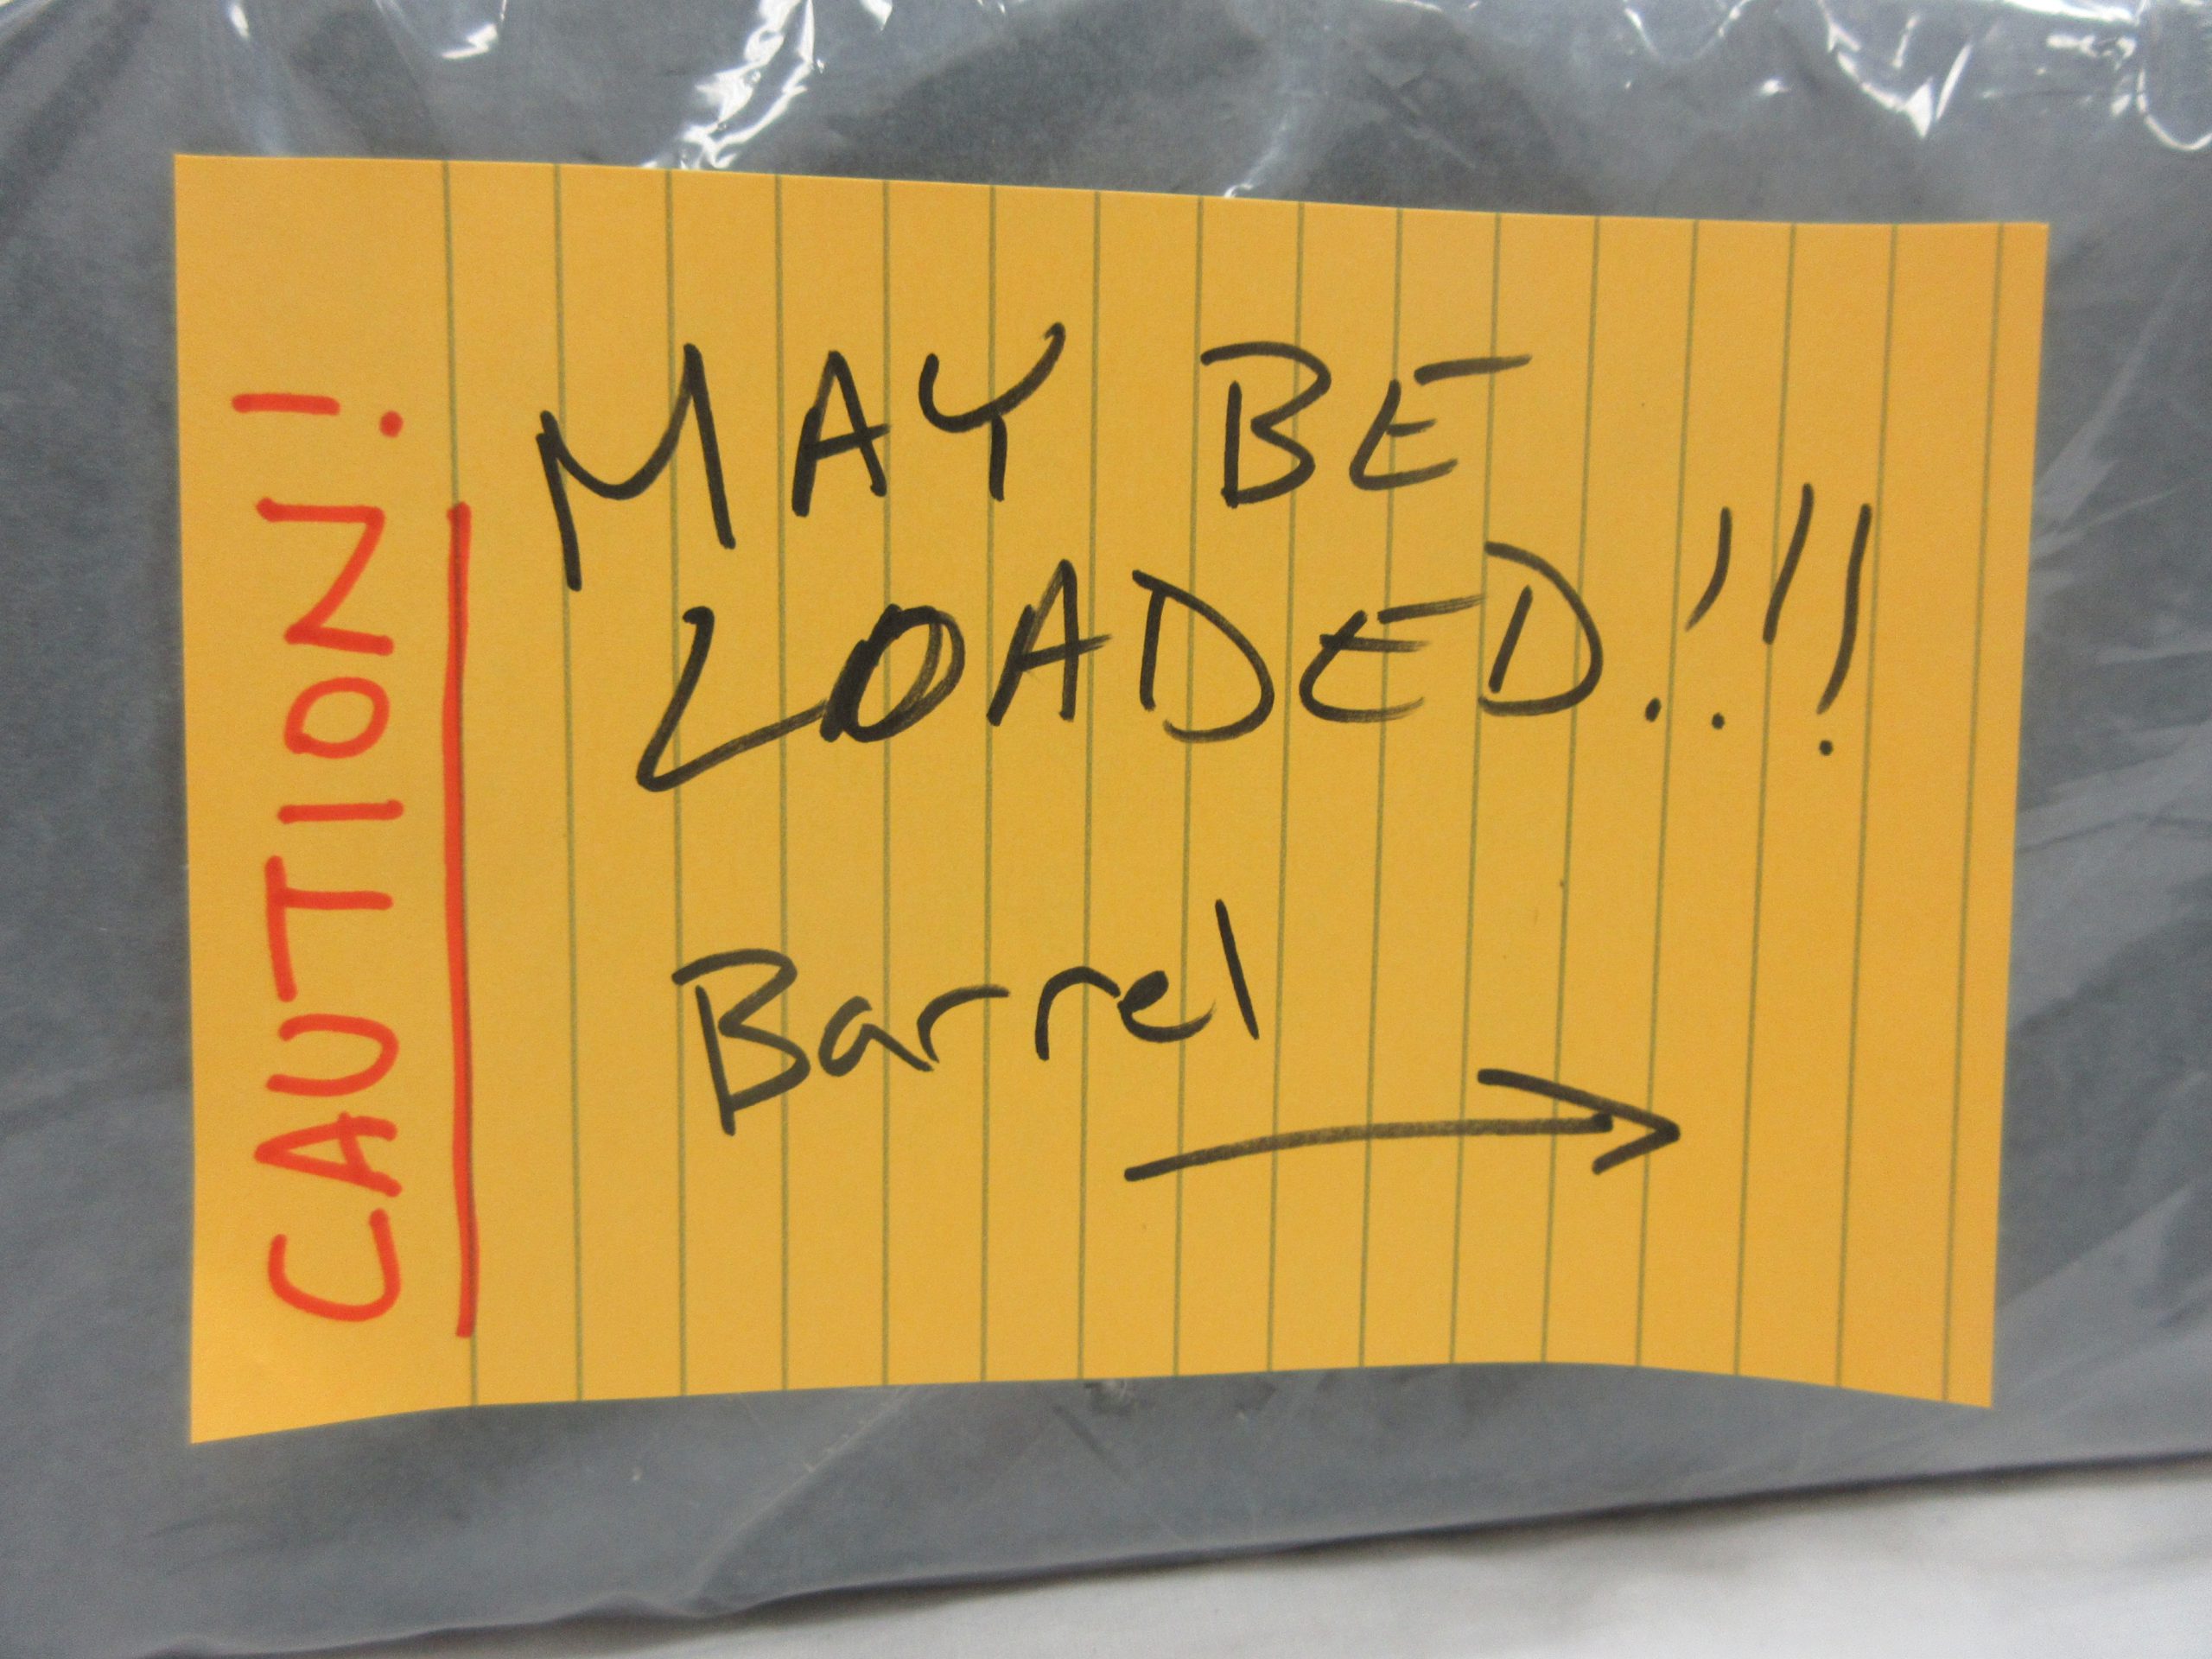 "Caution, May Be Loaded" label on box containing firearm.